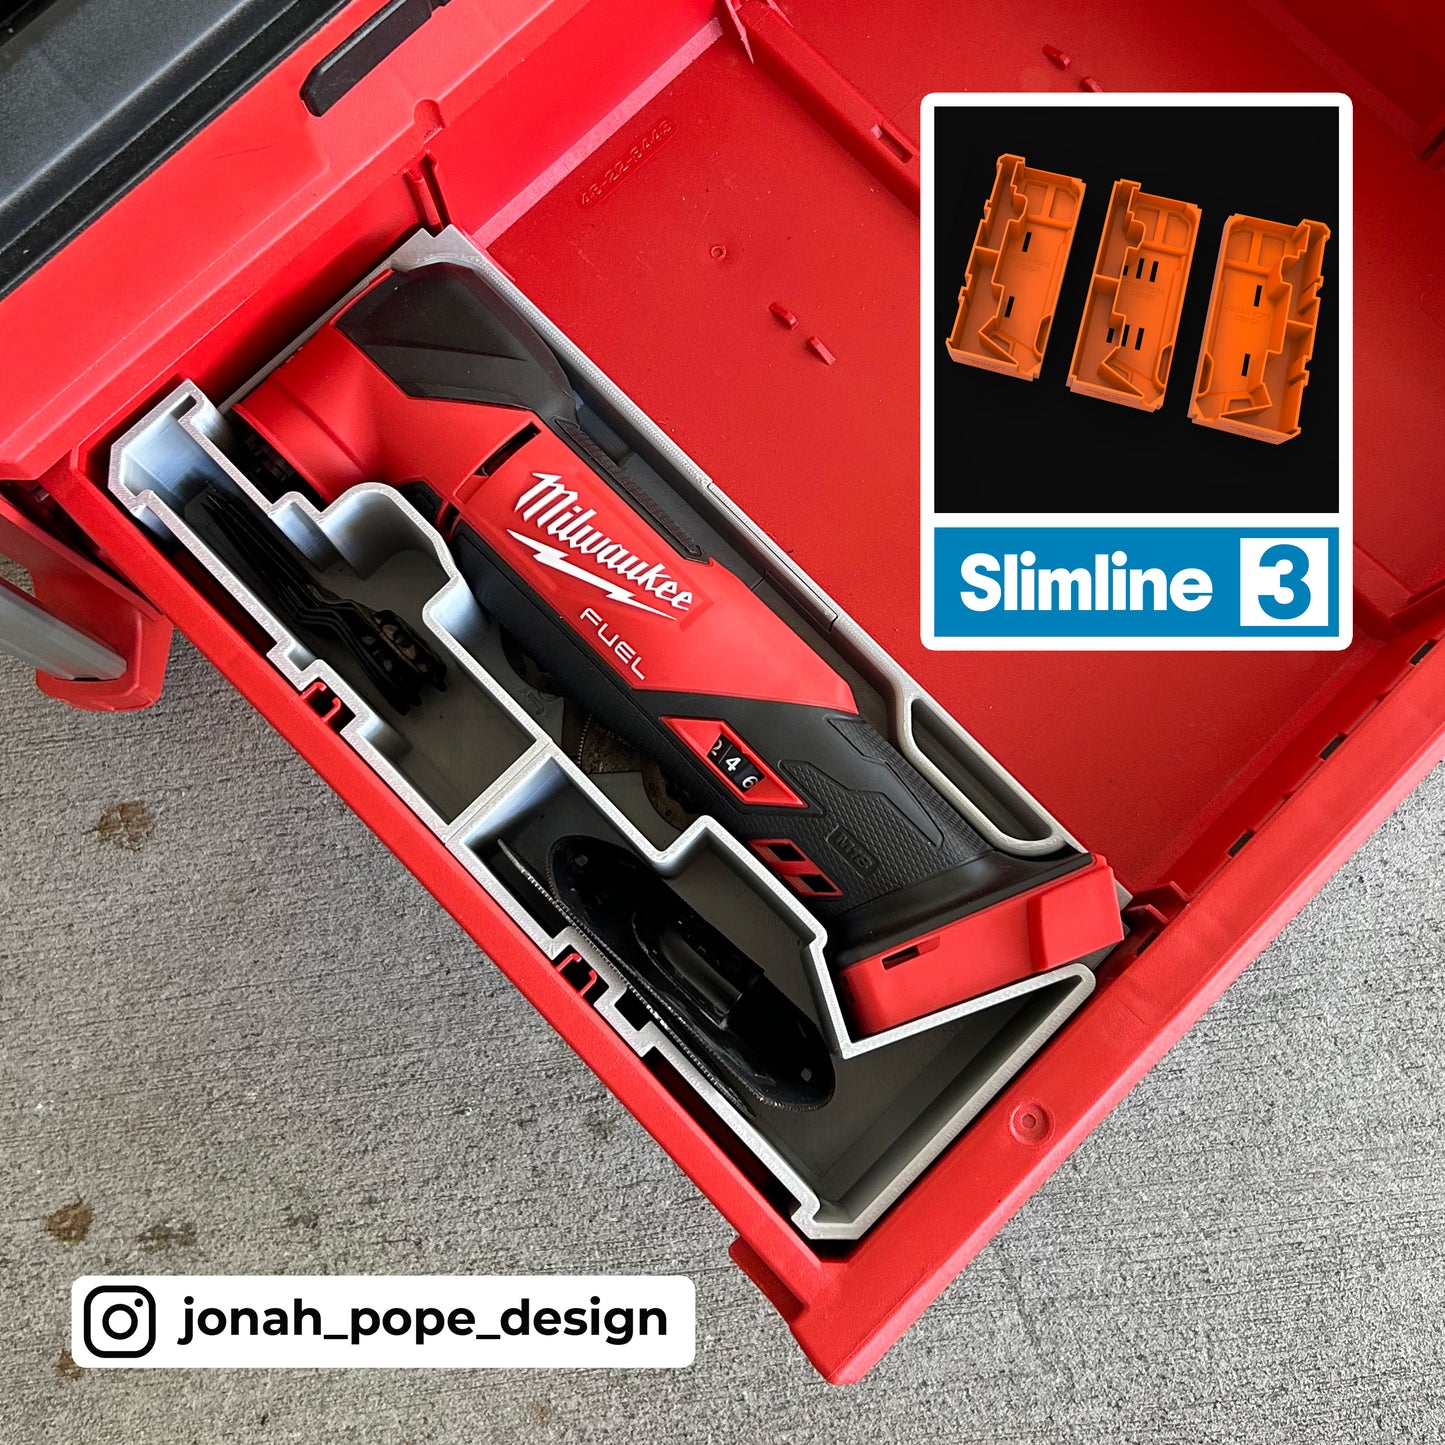 M18 Multi-tool Fuel insert for Milwaukee Packout 2/3 Draw By Jonah Pope Design